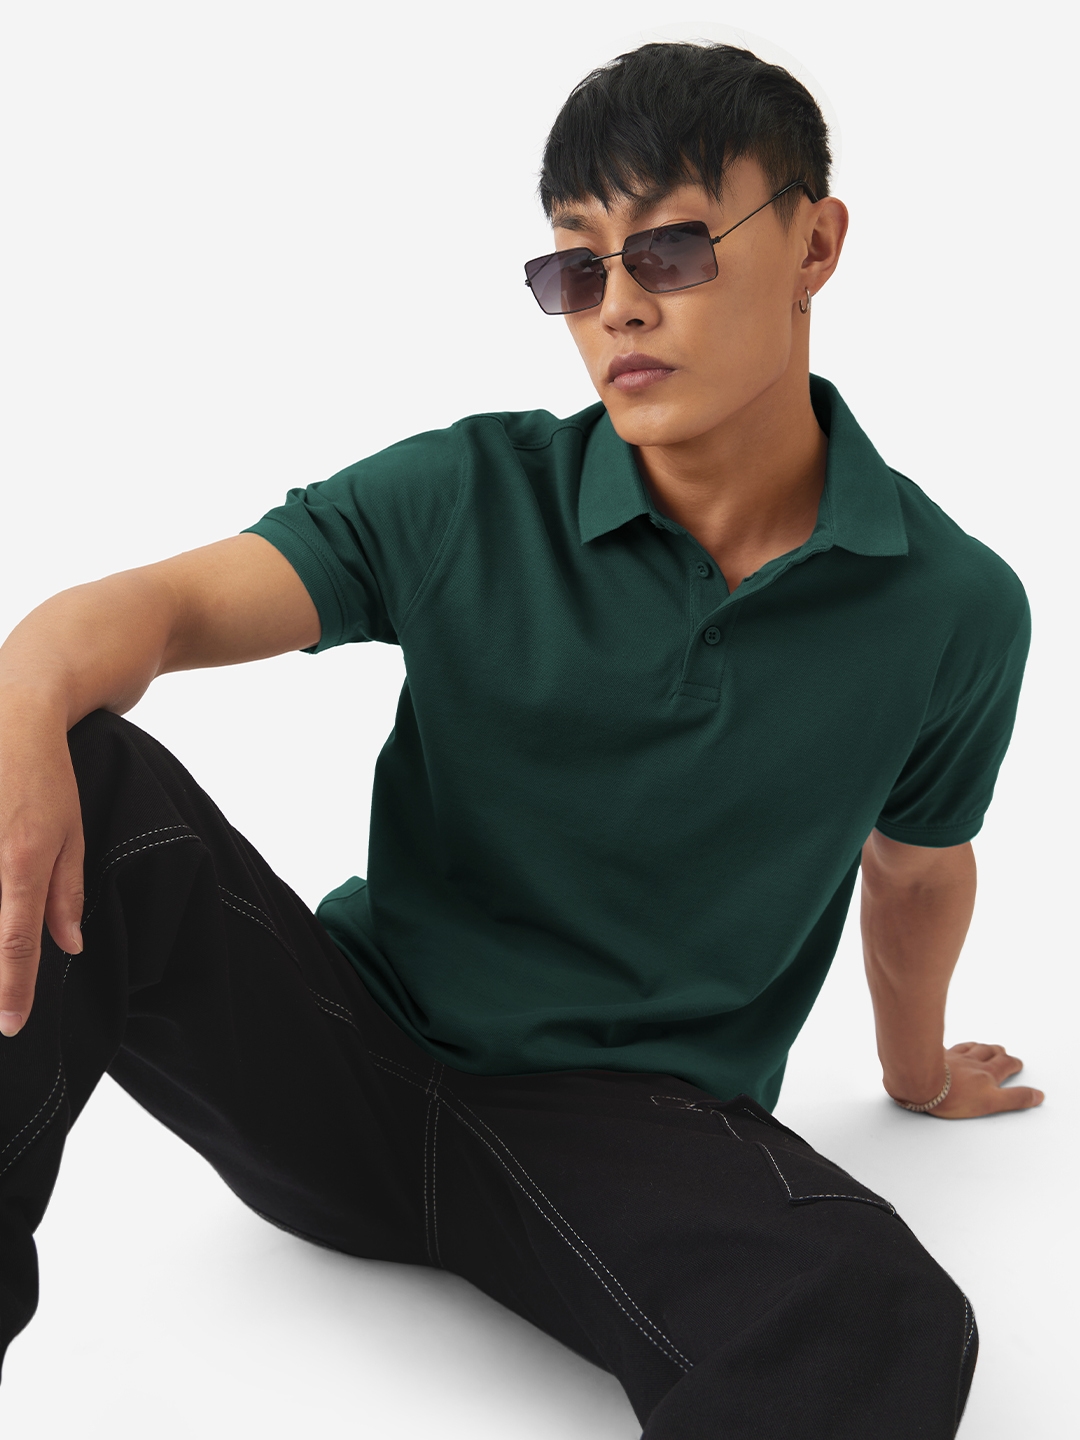 The Souled Store | Men's Solids: Emerald Green Polo T-Shirt